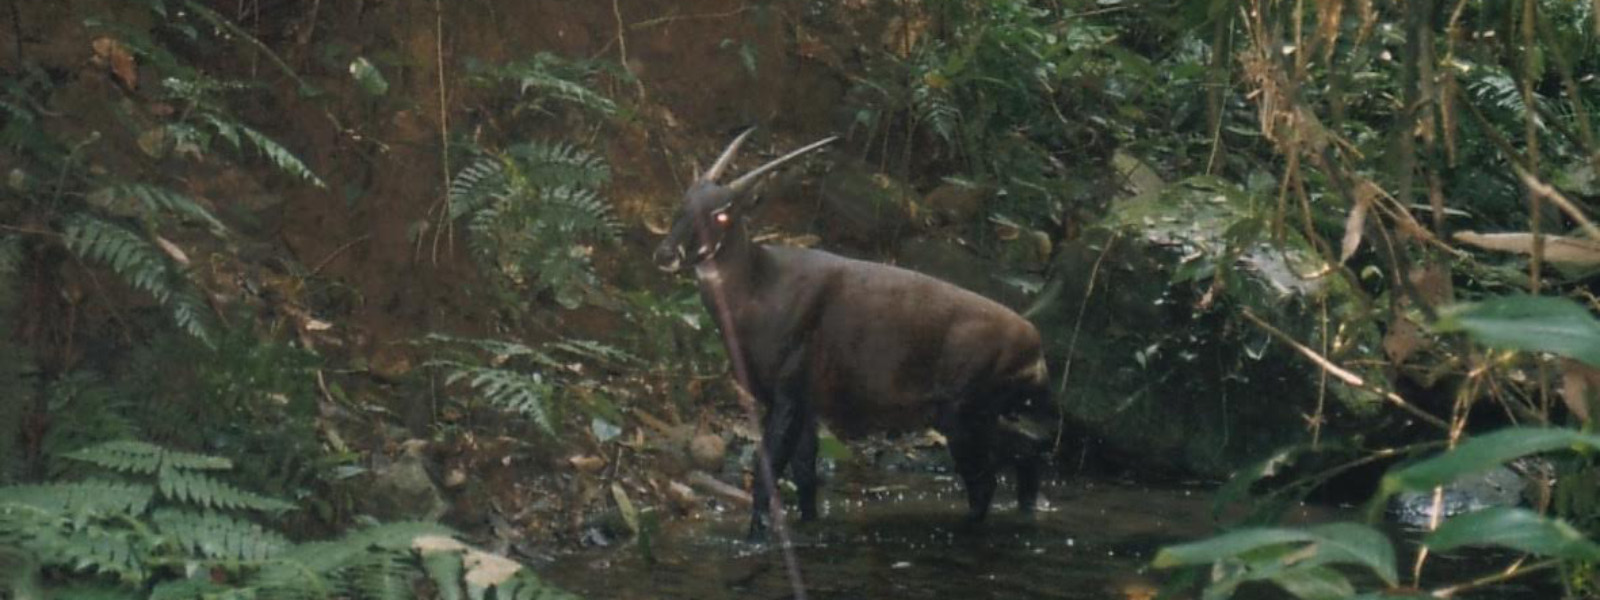 The fight against Saola extinction: there's still time if we act now -  Asian Species Action Partnership